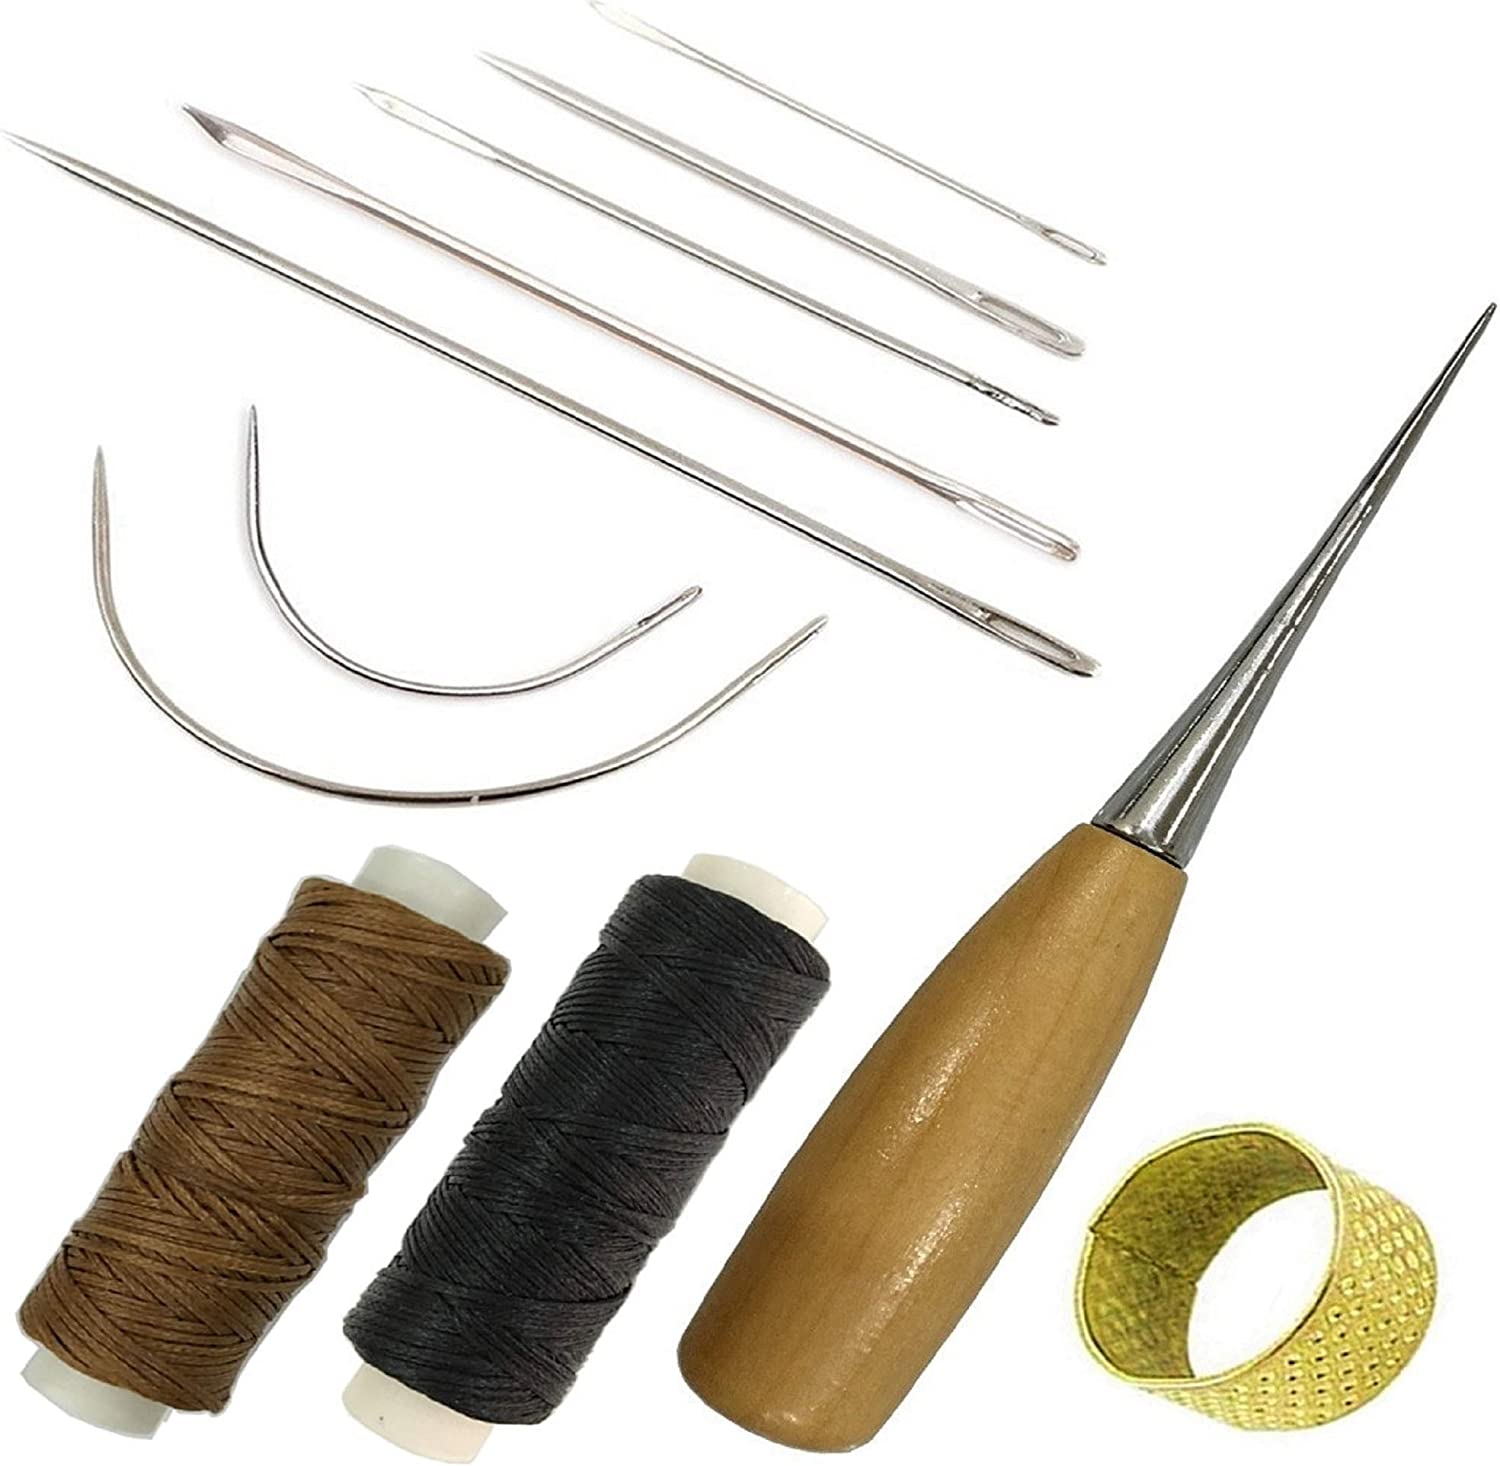 WONVOC Leather Embroidery Needles with Needle Case, Including Curved Needles, Triangle Needles, Straight Needles, Thimble, Scissors, Finger Cot for